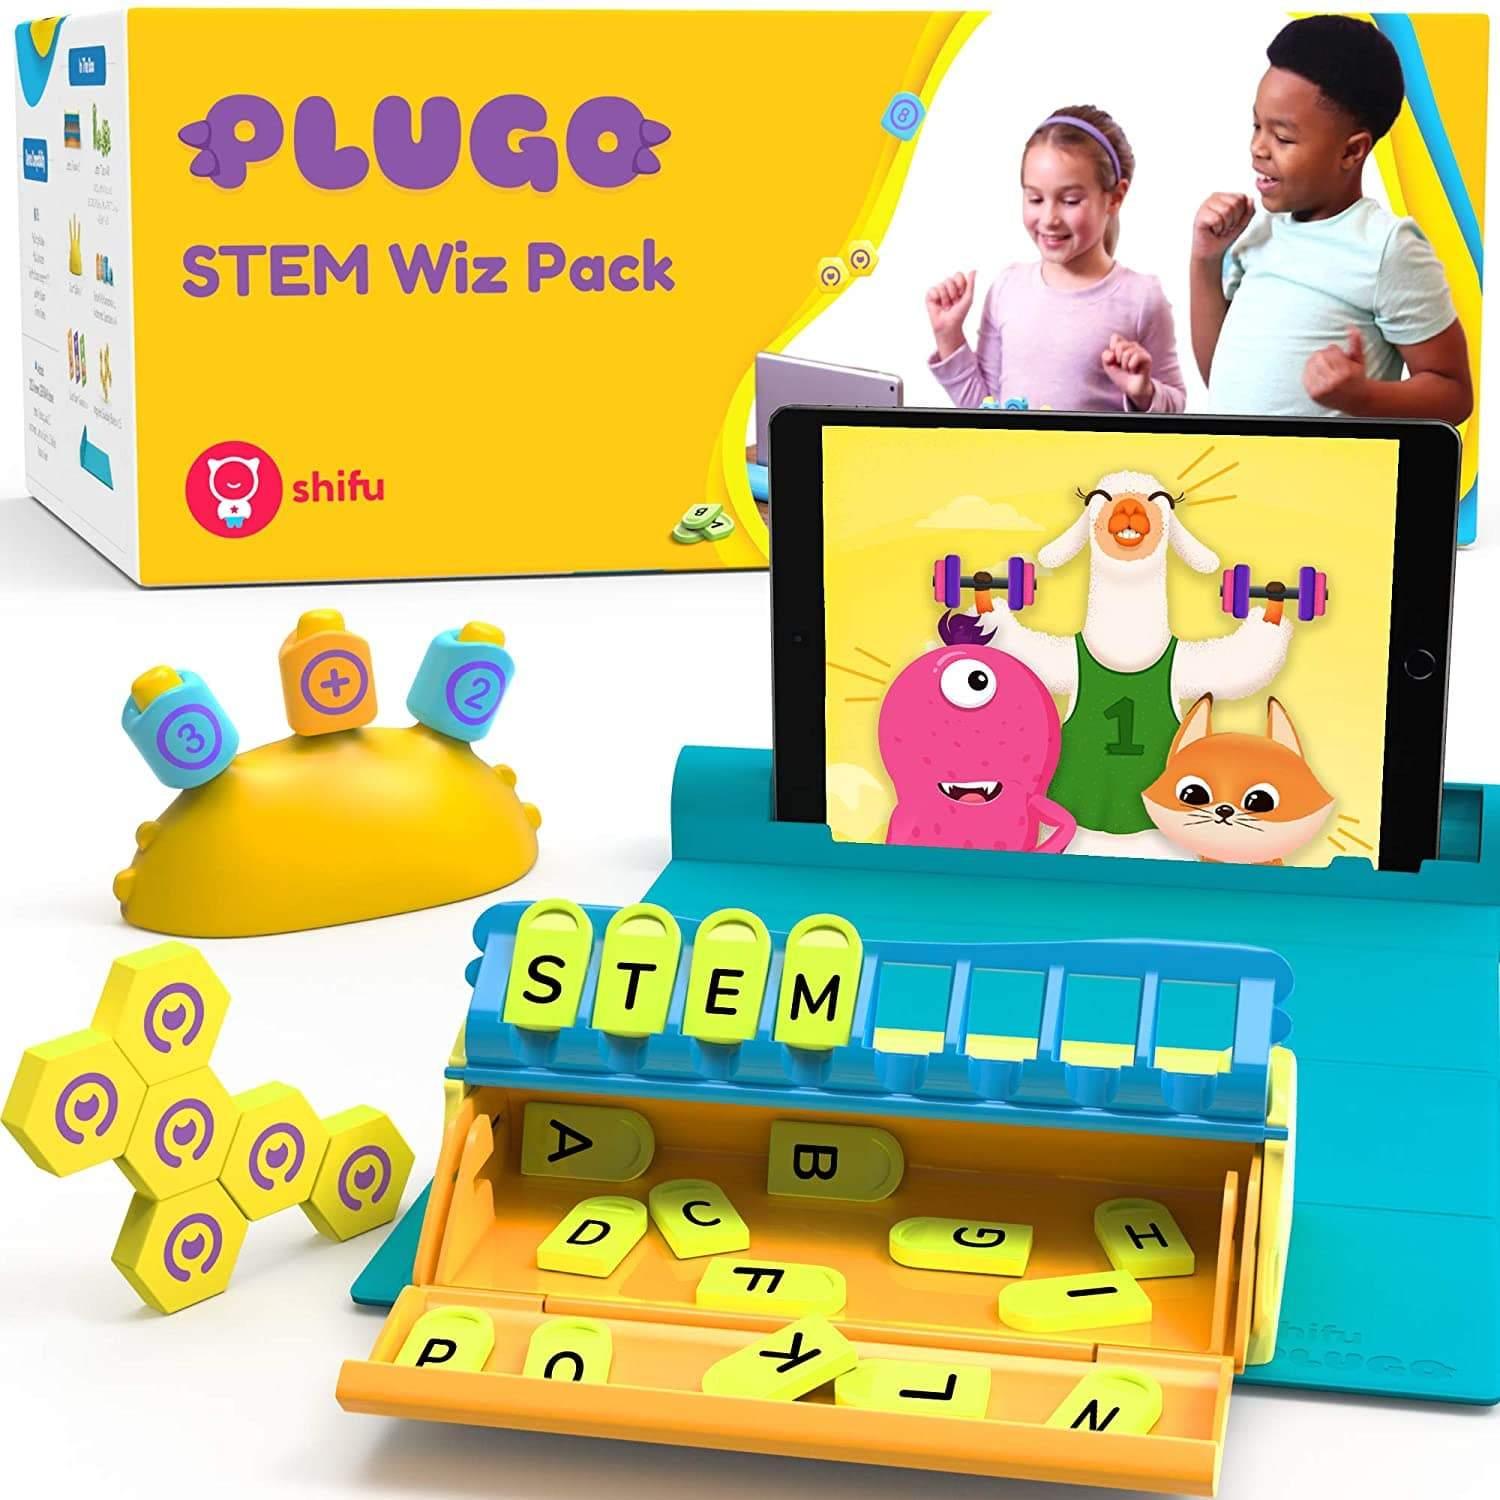 playshifu Shifu Plugo STEM Wiz Pack - Count & Link Kits | Math, Puzzles & Games | Ages 4-10 Years STEM Toys | Educational Gift for Kids (App Based)